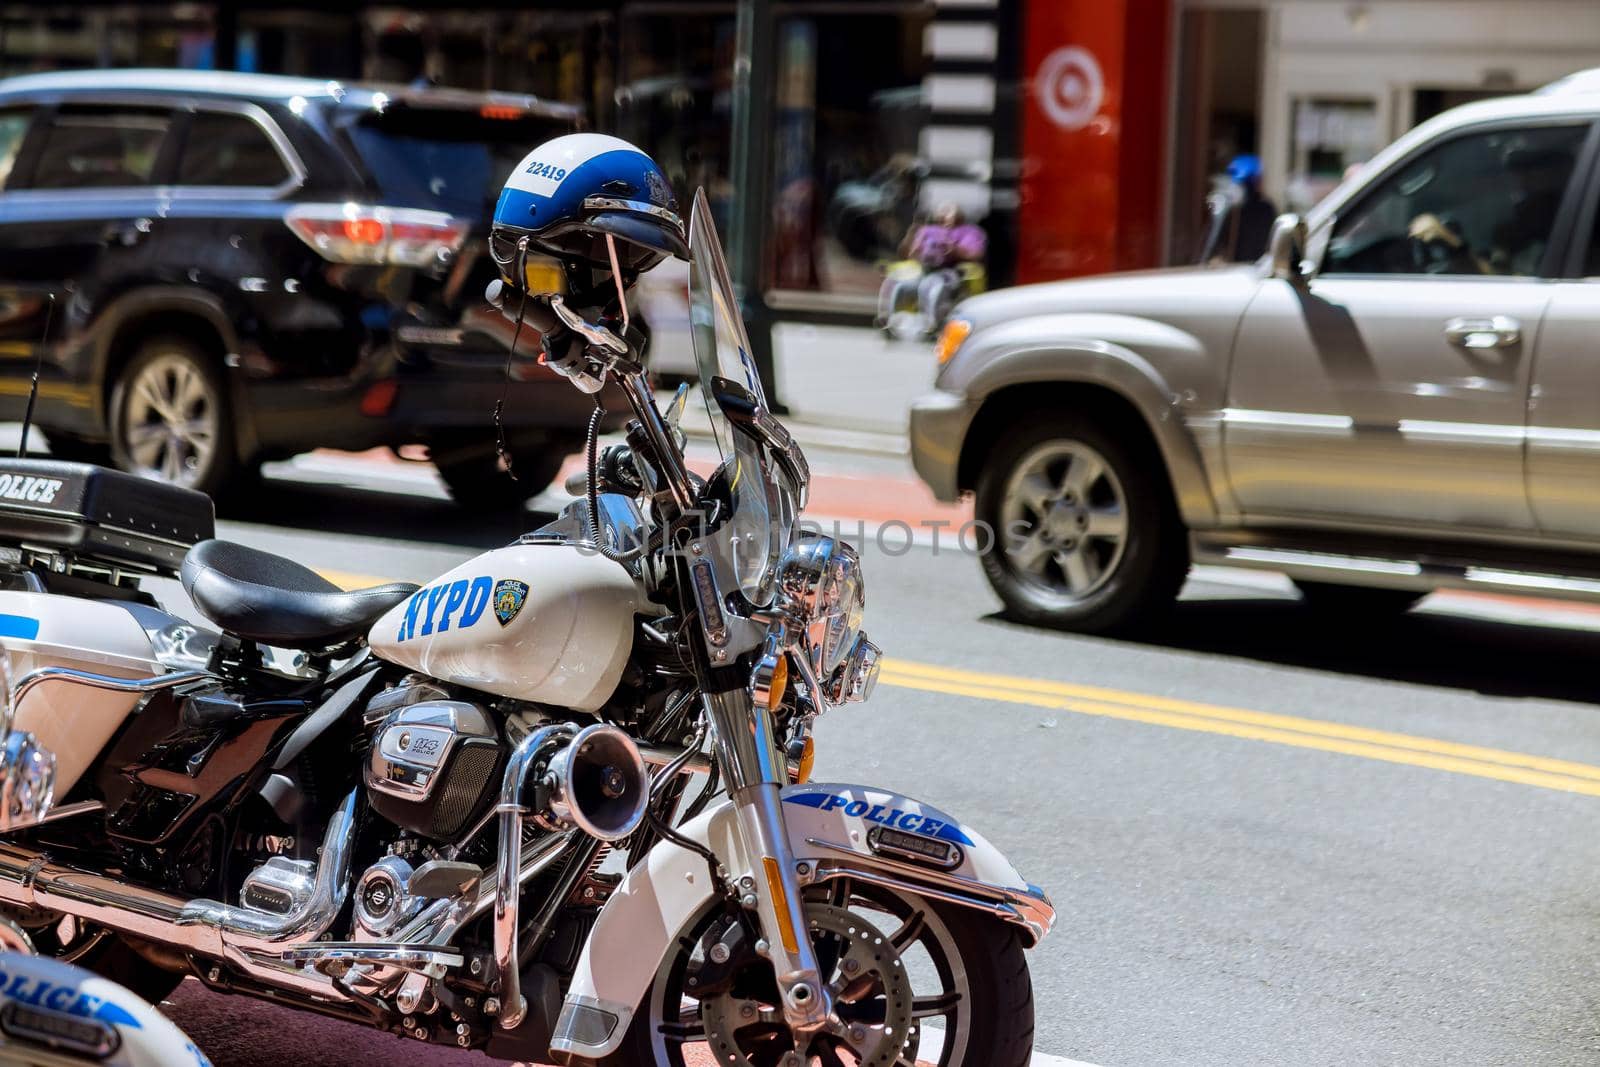 18 June 2021 New York, USA: NYPD motorcycles parked in the streets with police New York City